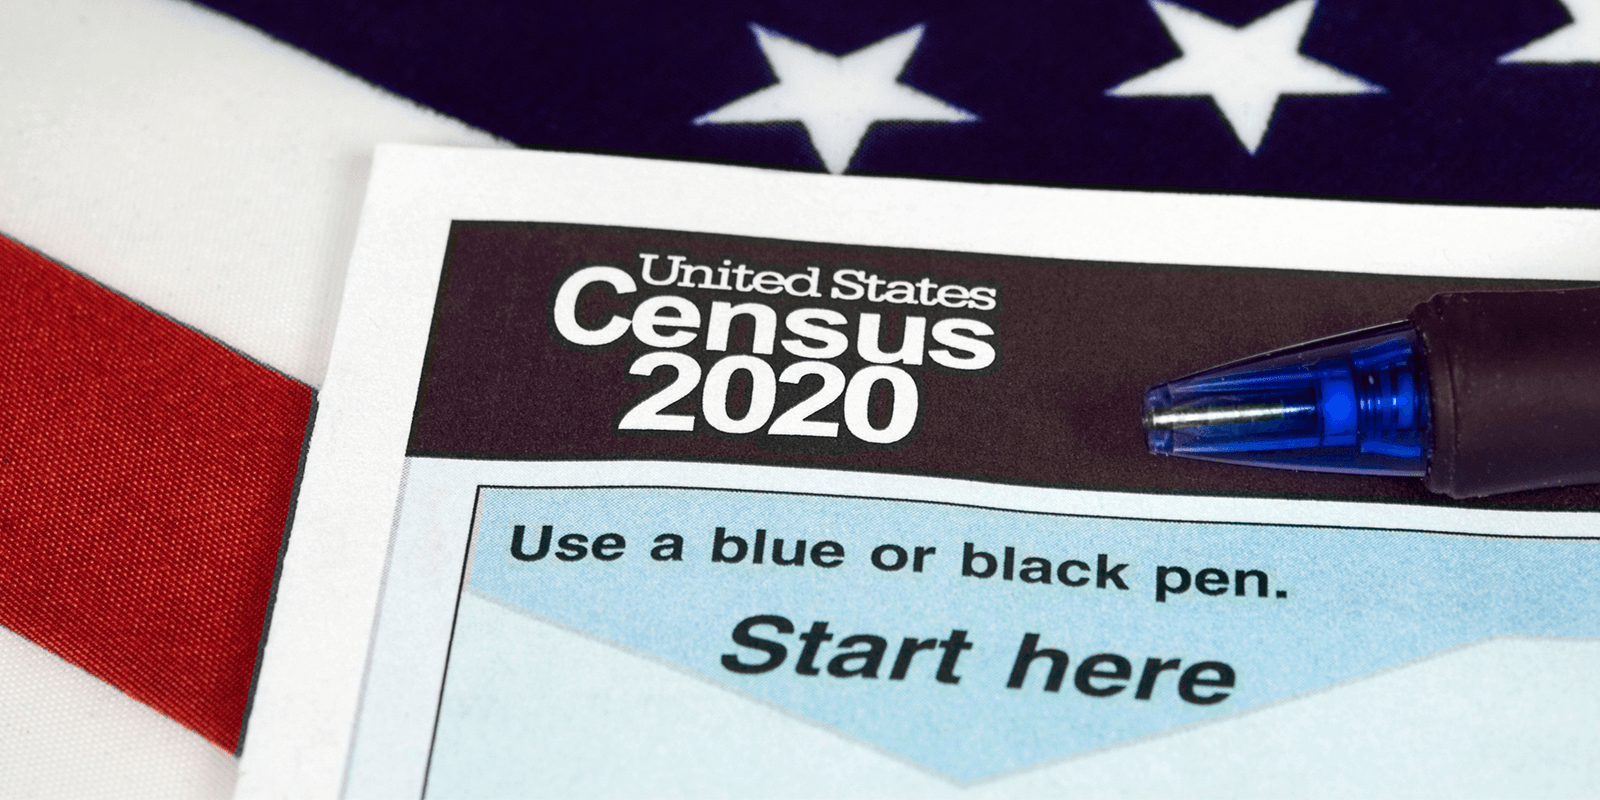 Census 2020: It’s a Big Deal for AFSCME